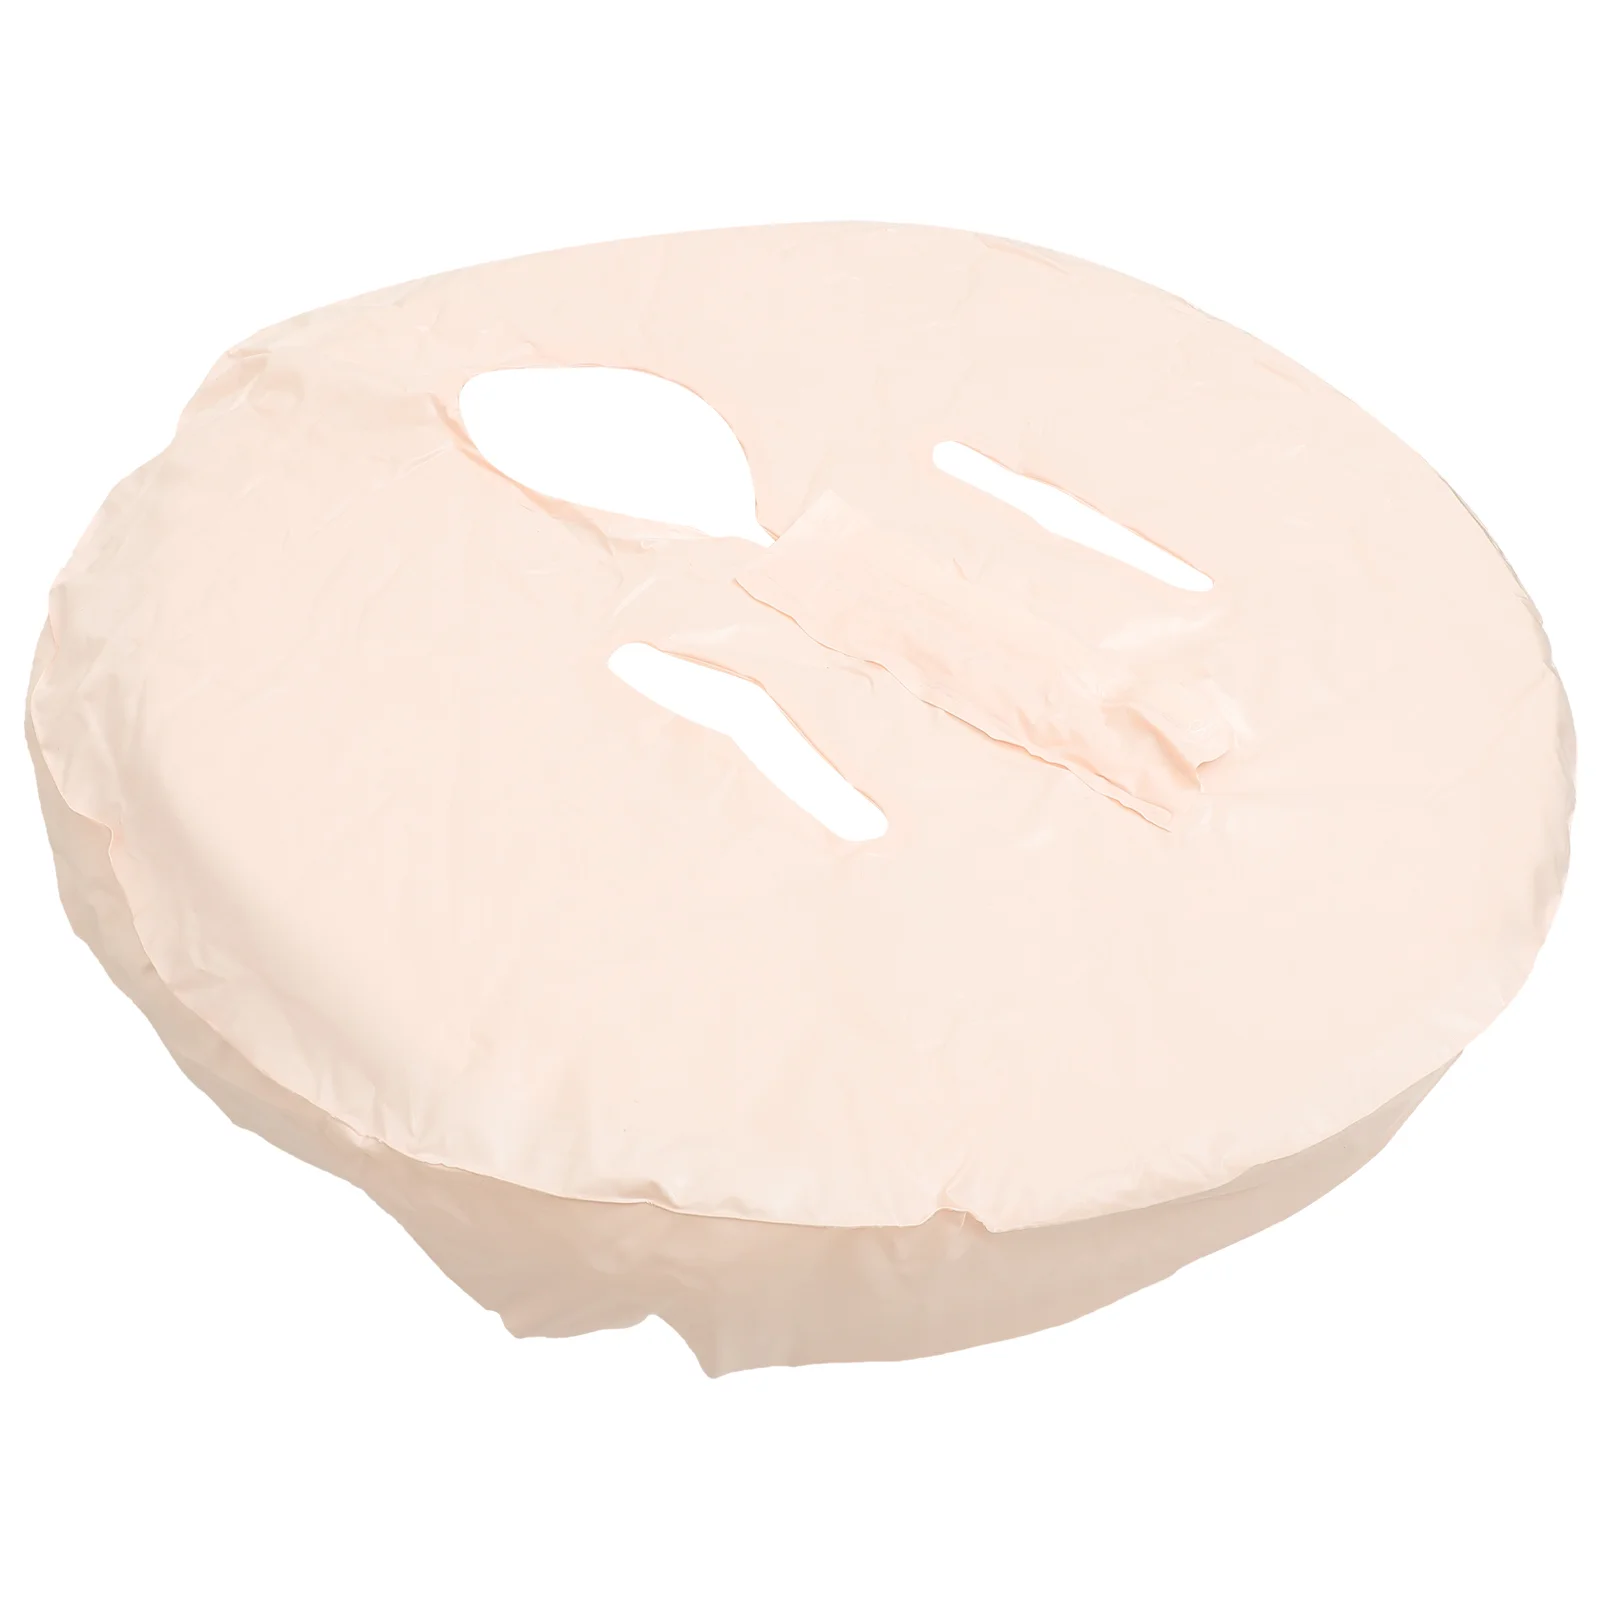 

Foldable Bathtub Insulated Cover Insulation Lid Foldable Bathtub Lid Bathtub Accessories